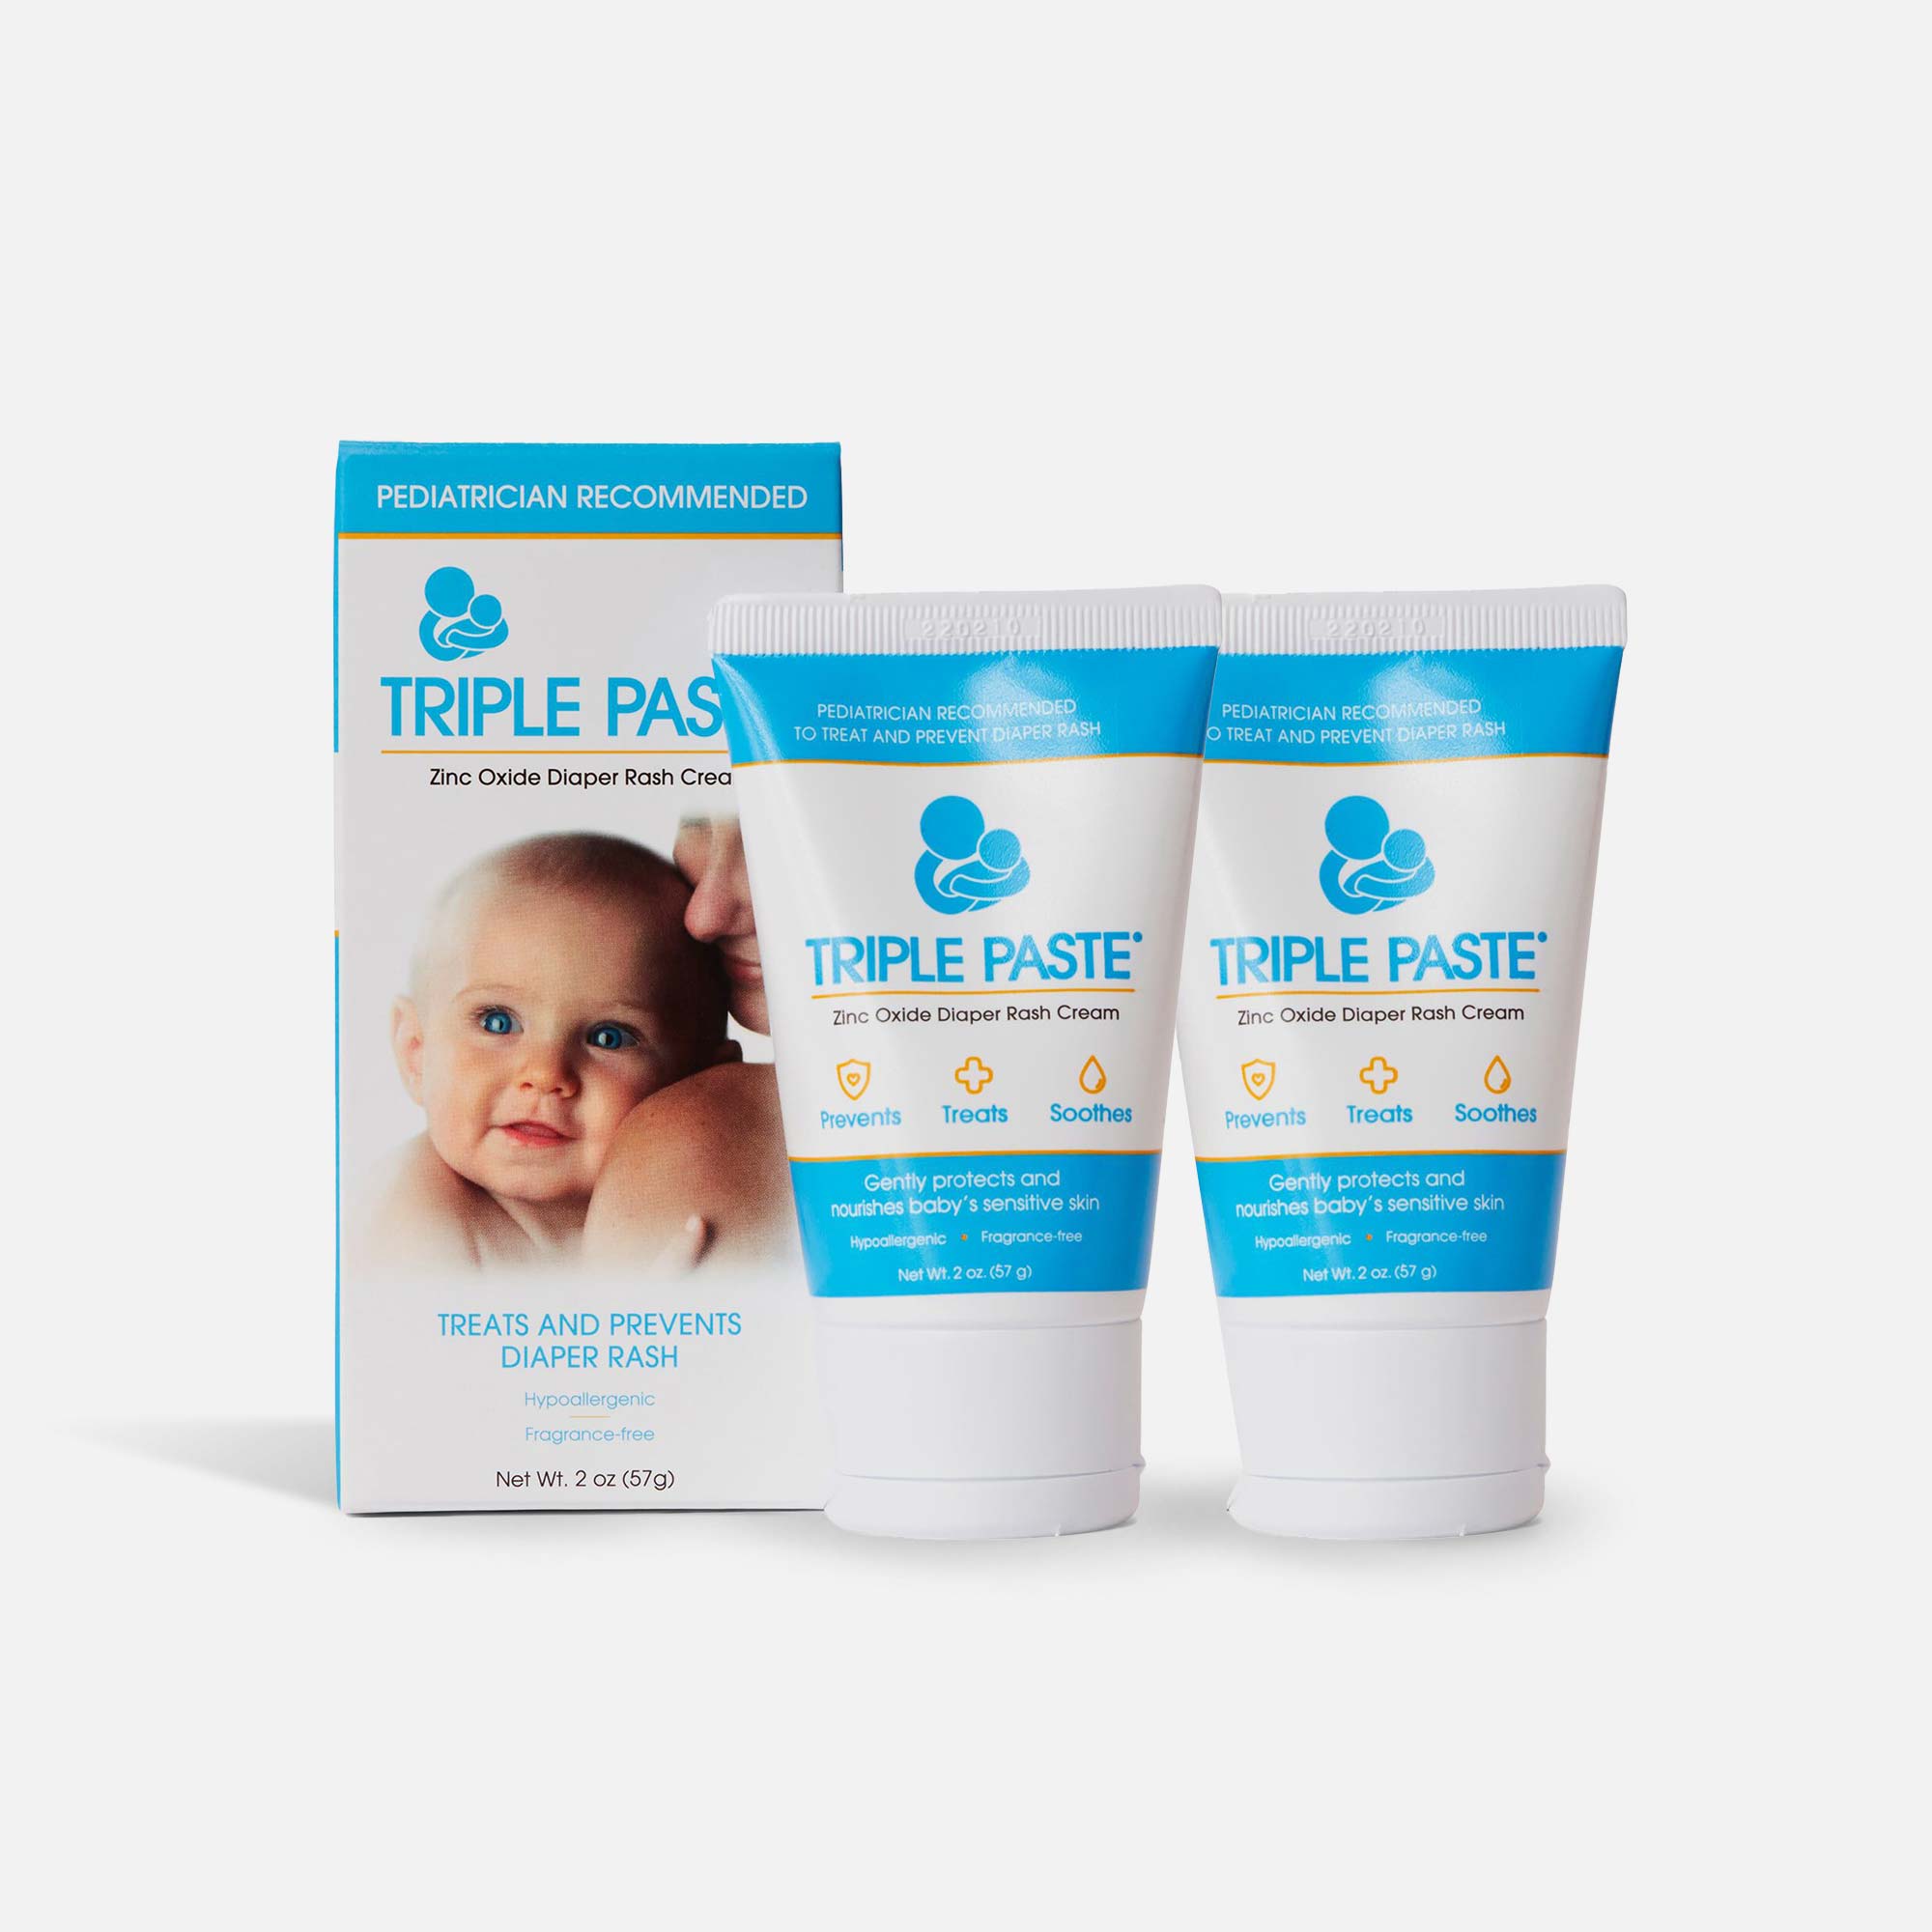 Triple Paste® Hypoallergenic Medicated Ointment for Diaper Rash